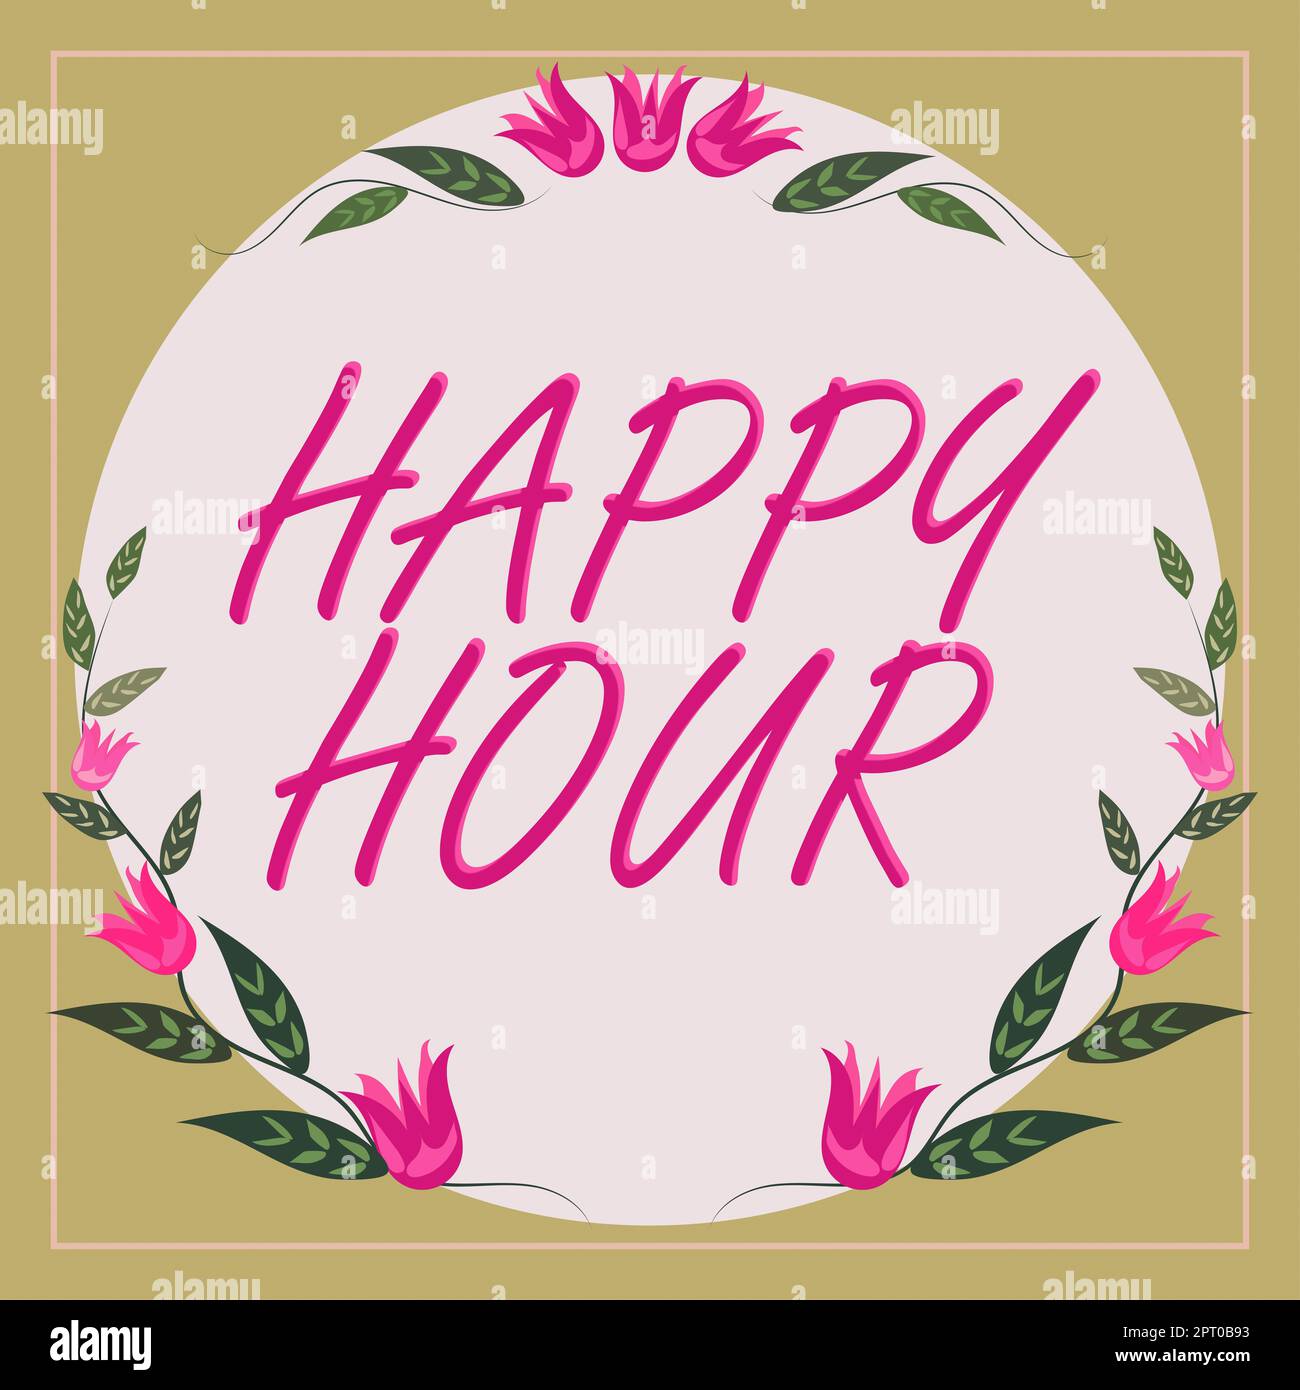 Inspiration showing sign Happy Hour, Concept meaning Spending time for activities that makes you relax for a while Stock Photo